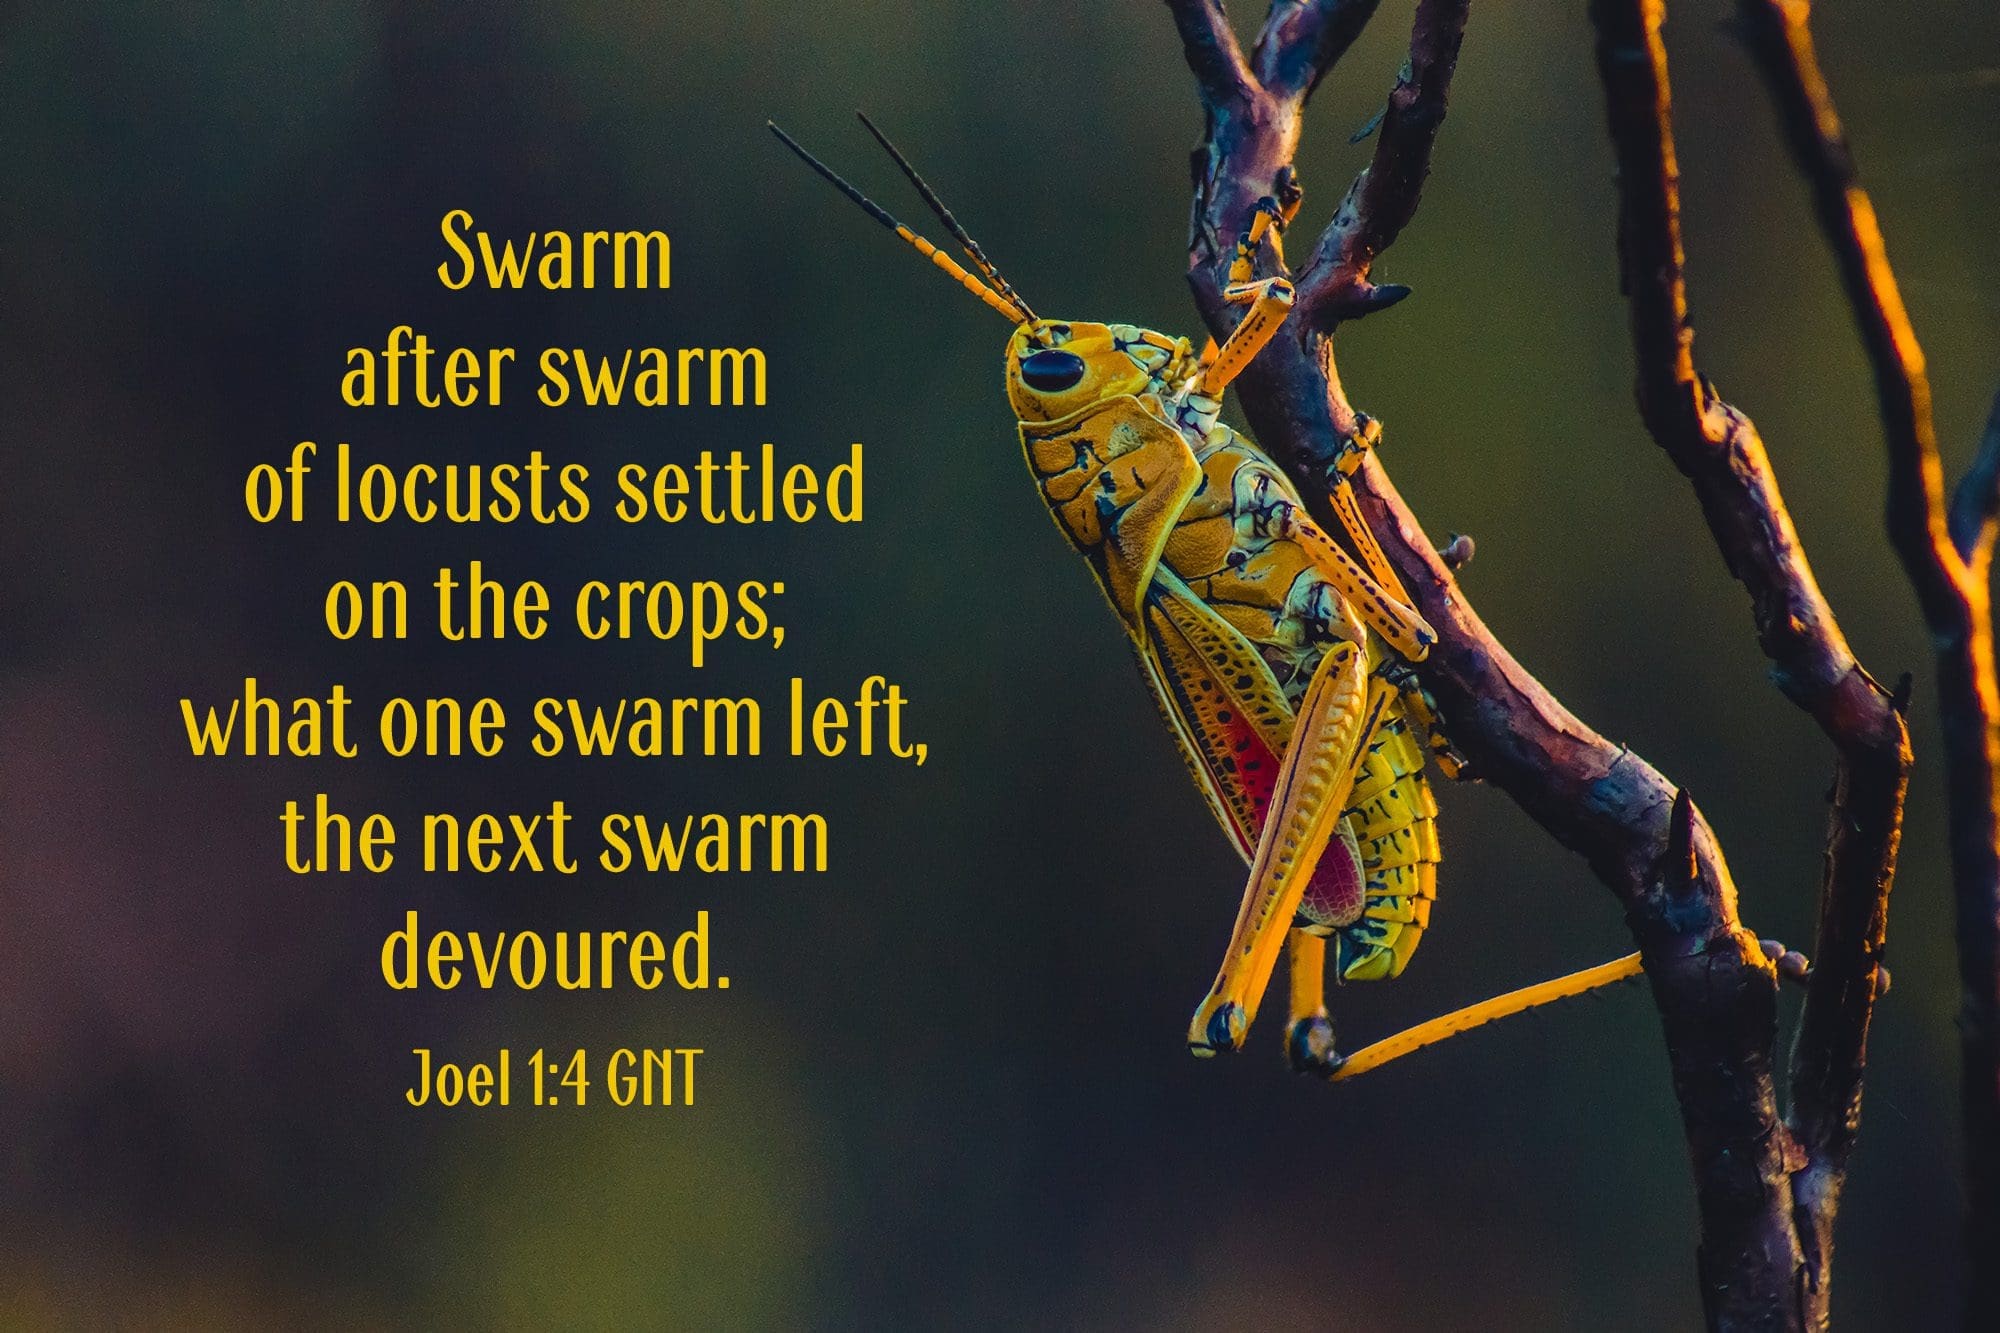 "Swarm after swarm of locusts settled on the crops; what one swarm left, the next devoured." Joel 1:4 GNT